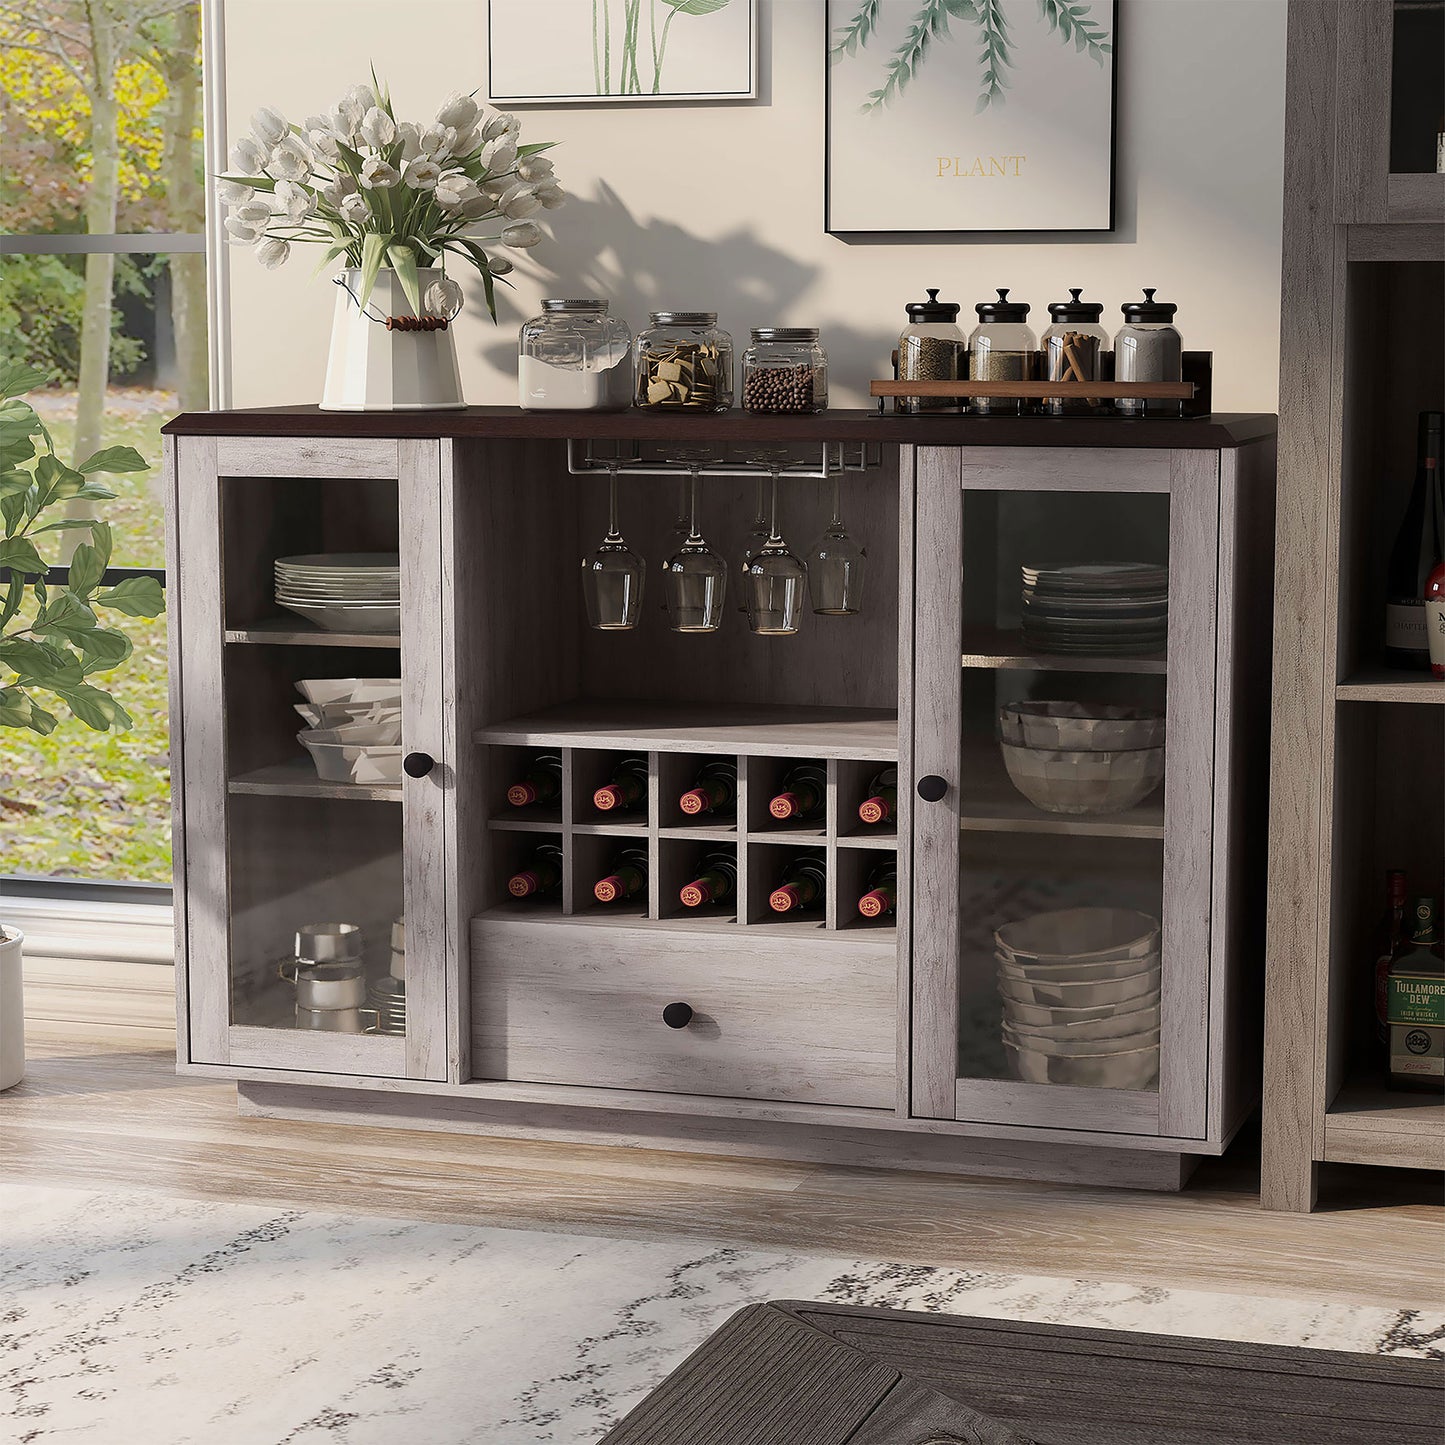 Left angled transitional coastal white six-shelf 10-bottle wine cabinet with glass doors in a dining room with accessories